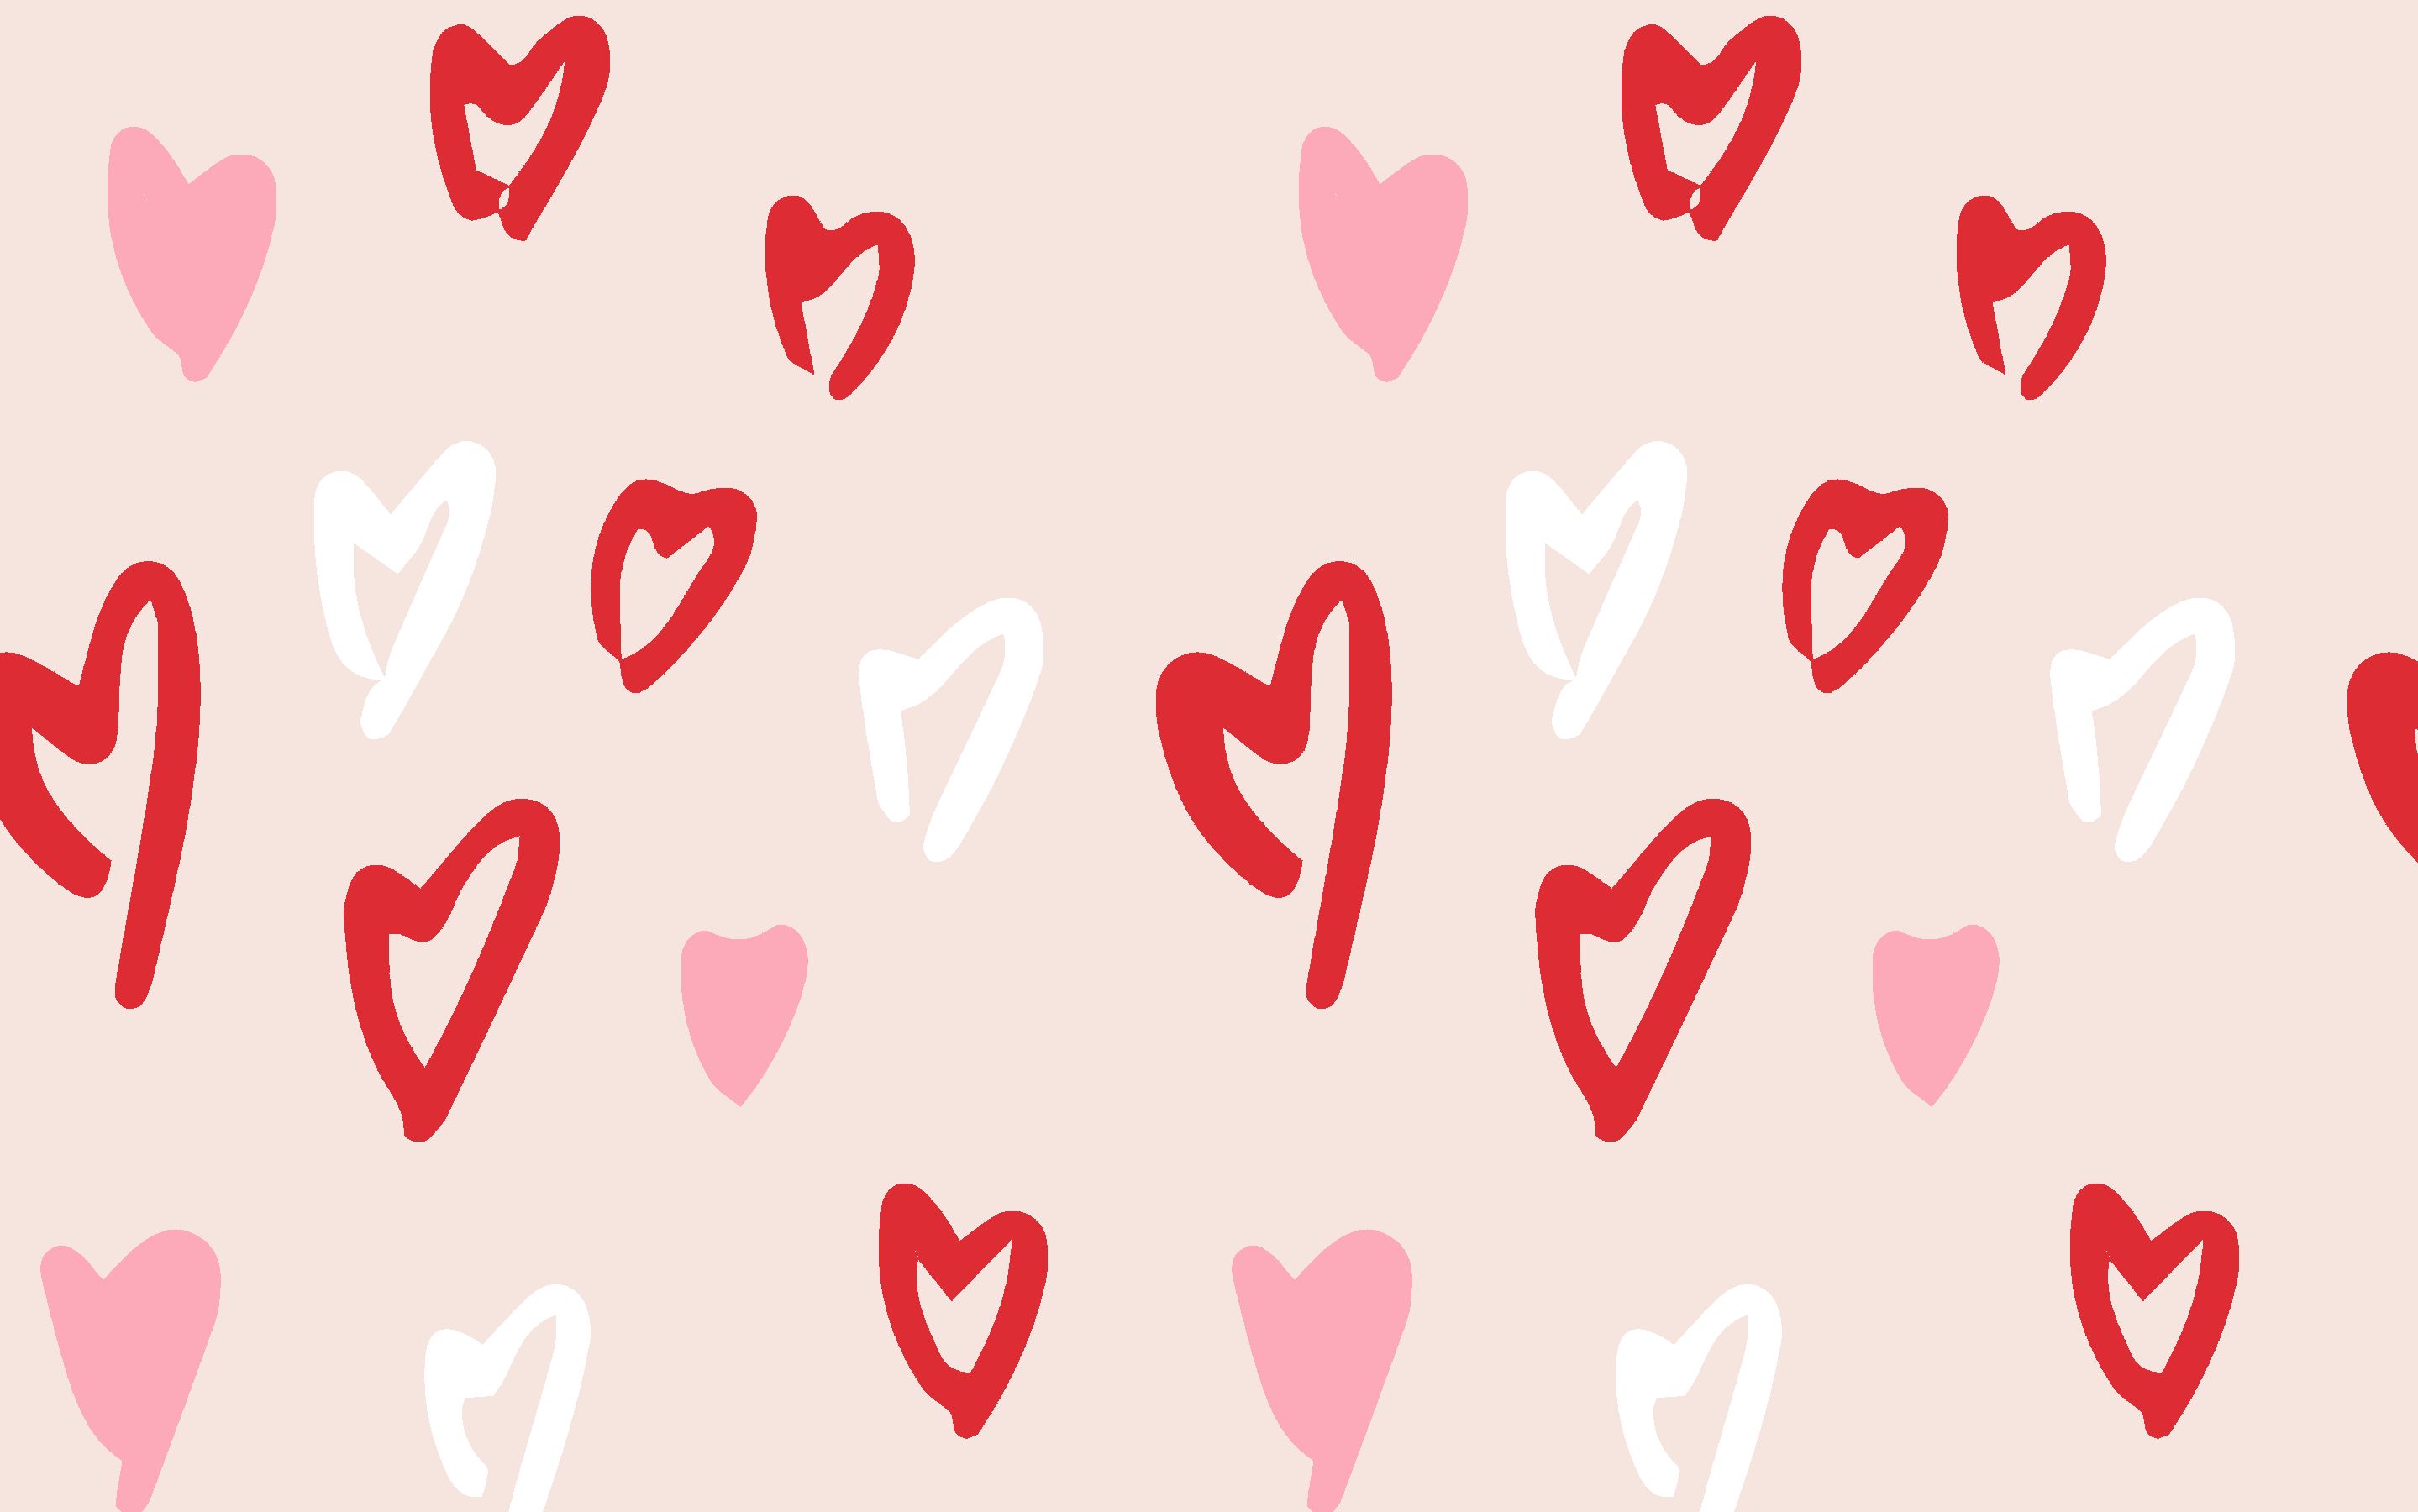 Free valentine's day heart wallpaper for your desktop or phone. Valentines wallpaper, Heart wallpaper, Valentine background